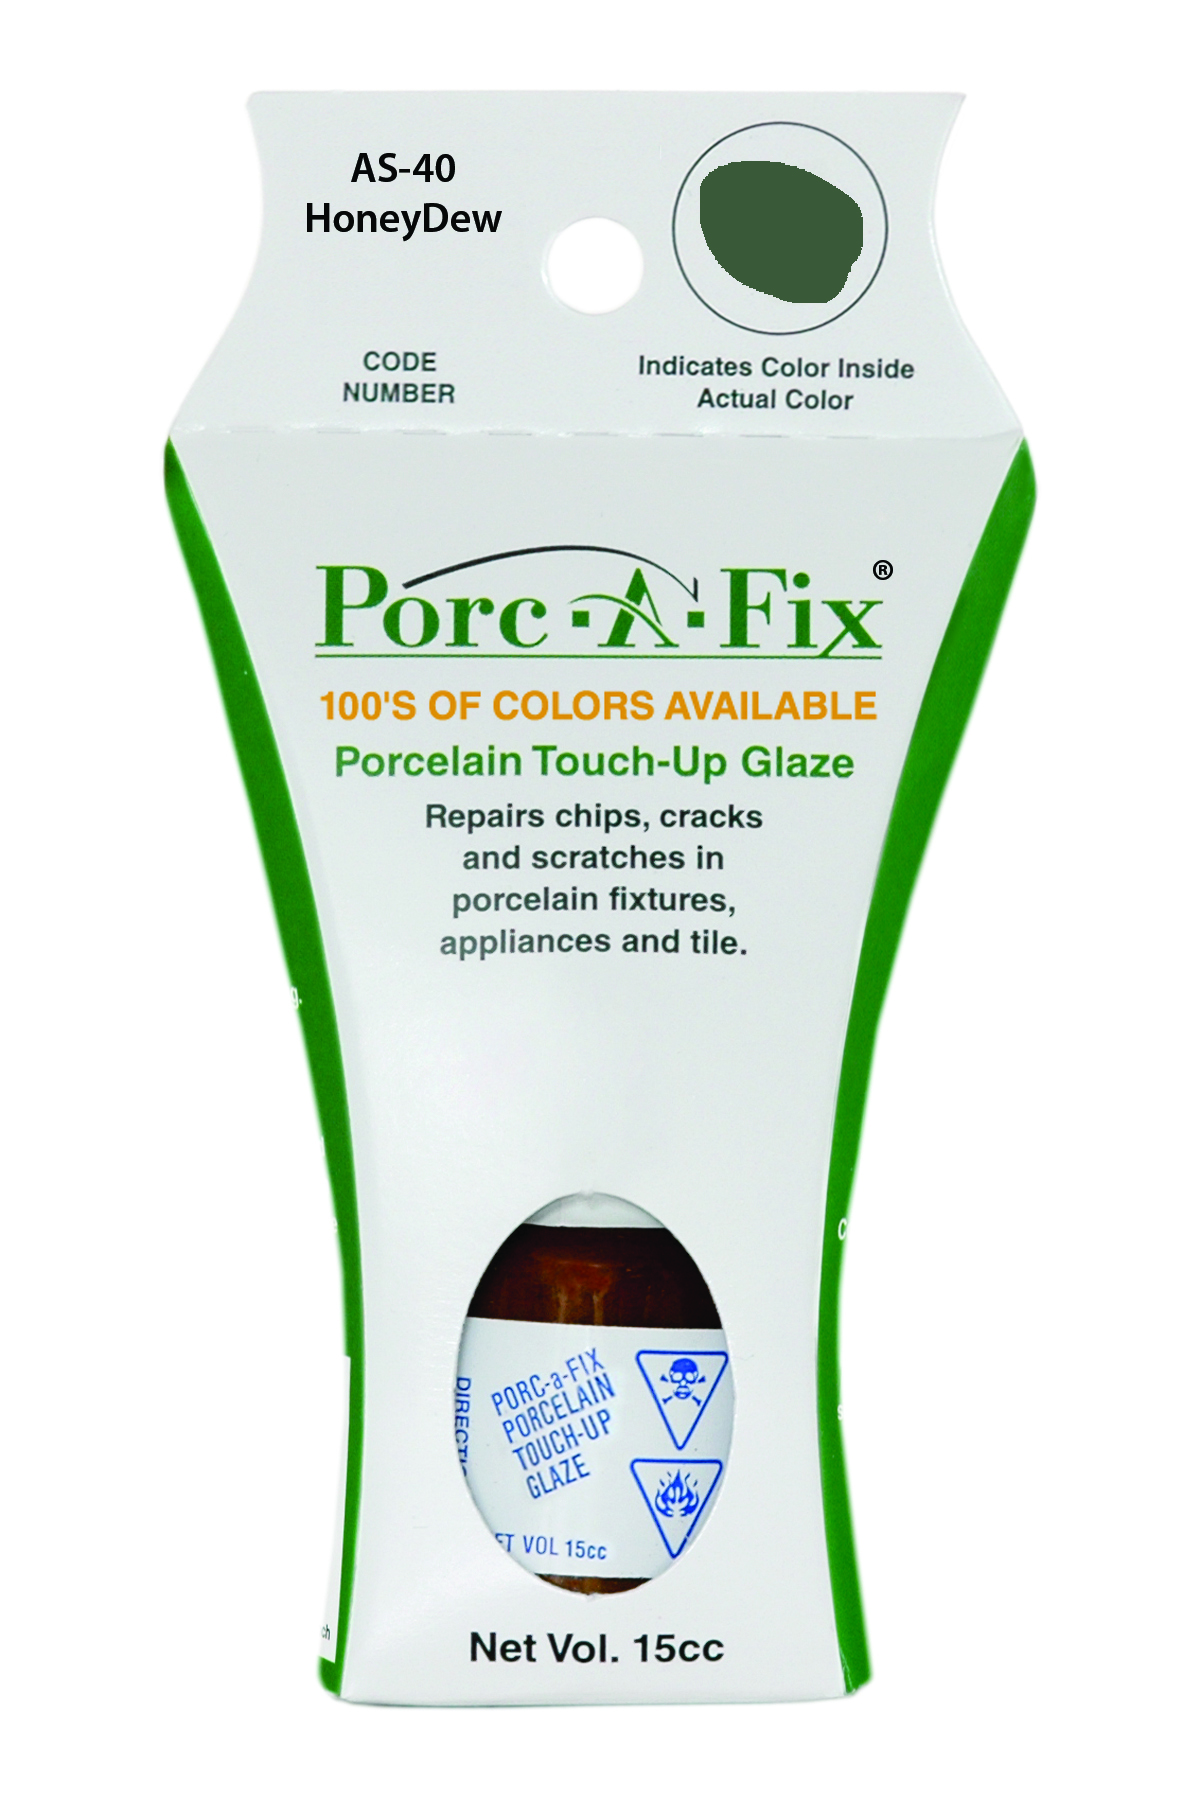 Fixture-Fix | AS-40 | Porc-A-Fix Touch-Up Glaze American Standard Honeydew - Compatible with American Standard 070900-1770A Touch Up Paint Kit - HONEYDEW